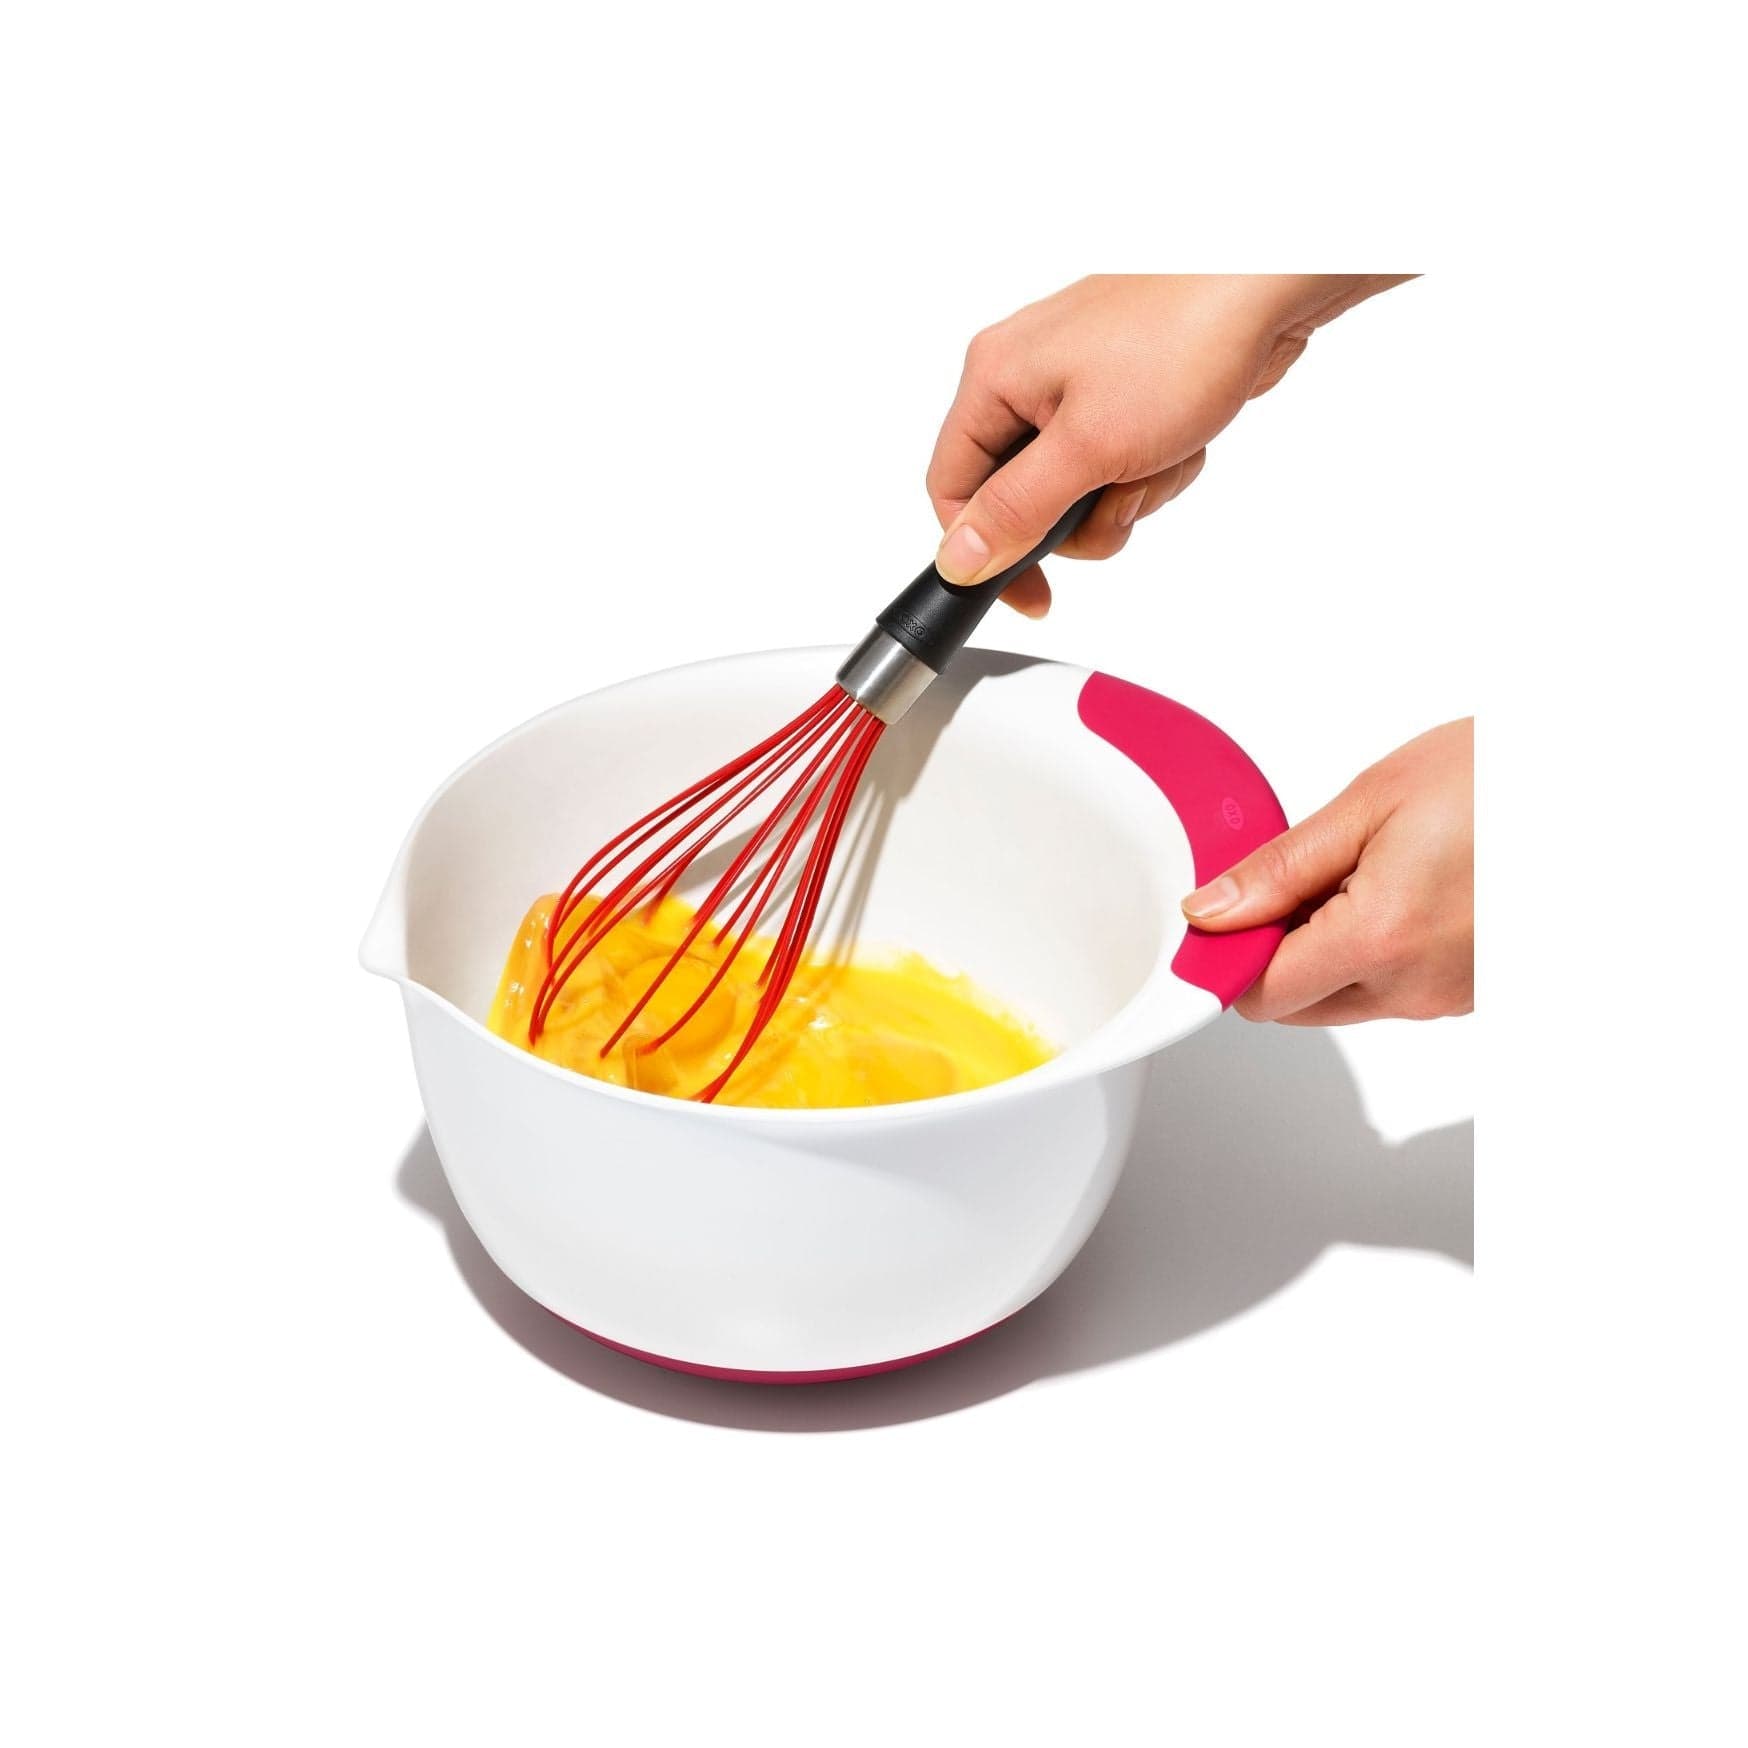 OXO Good Grips Colored Mixing Bowls, Set of 3 + Reviews